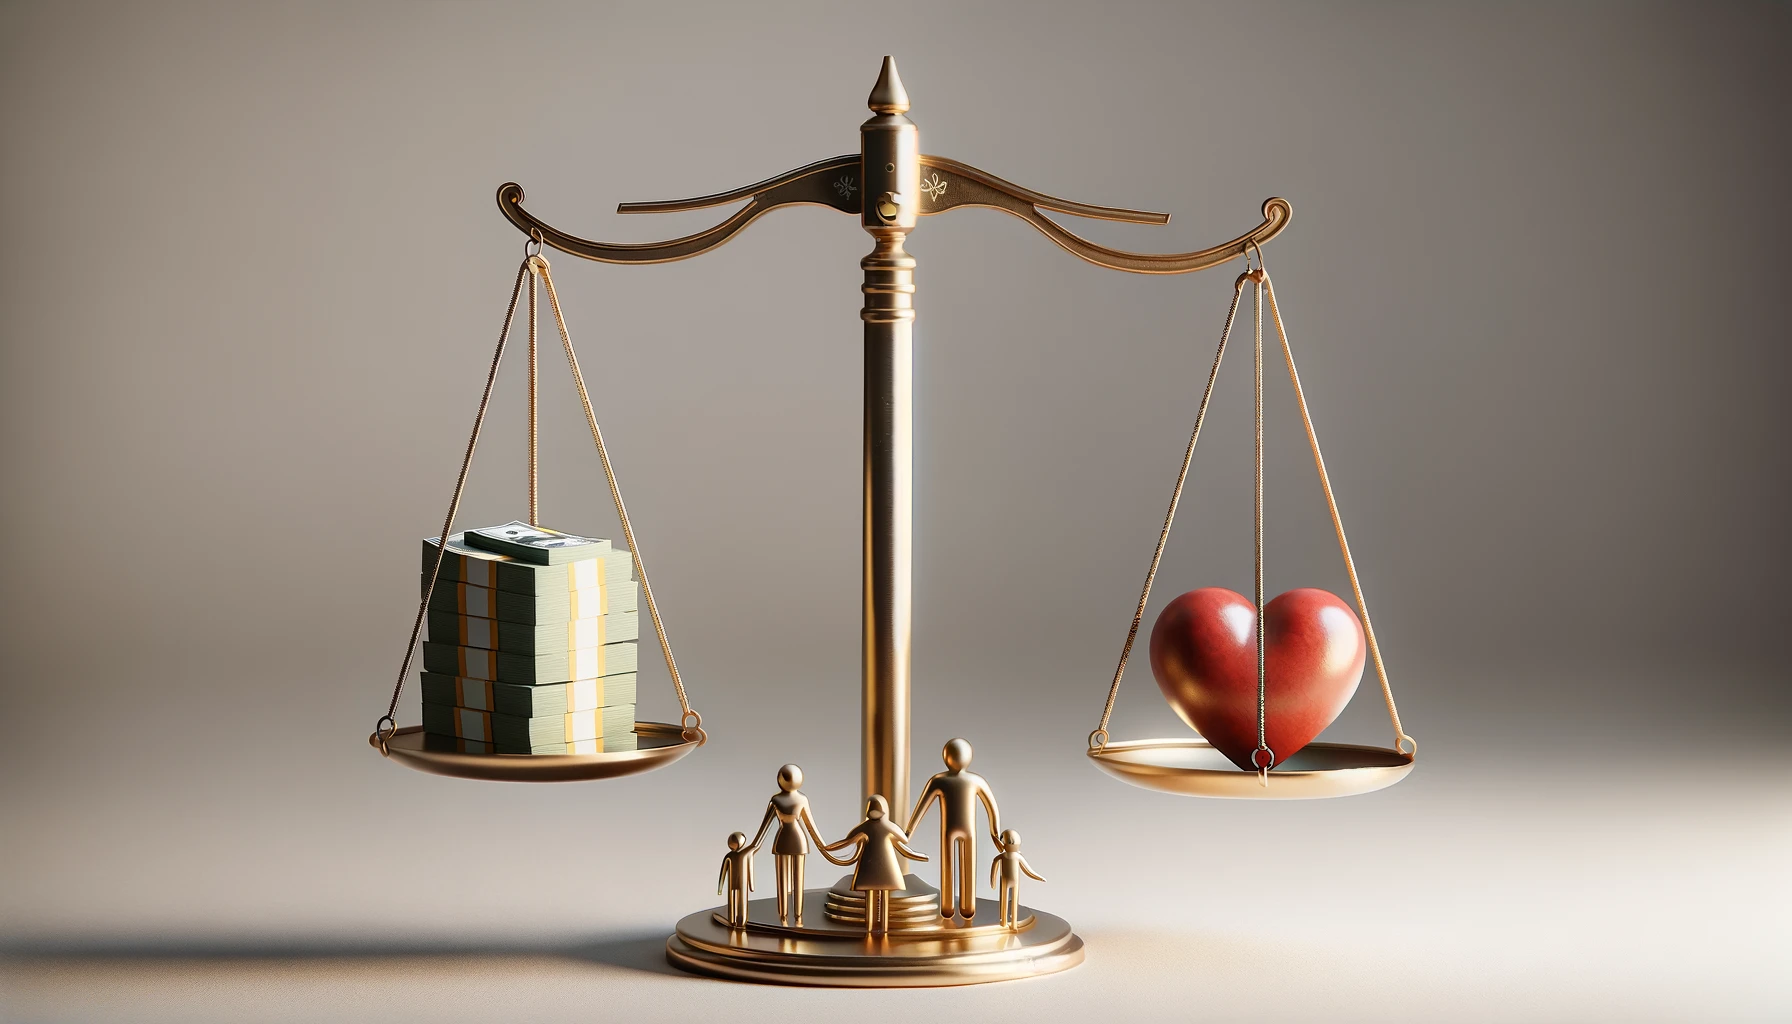 photorealistic image of a balanced scale in a 16 9 aspect ratio. On one side of the scale is a stack of money, representing financial wealth